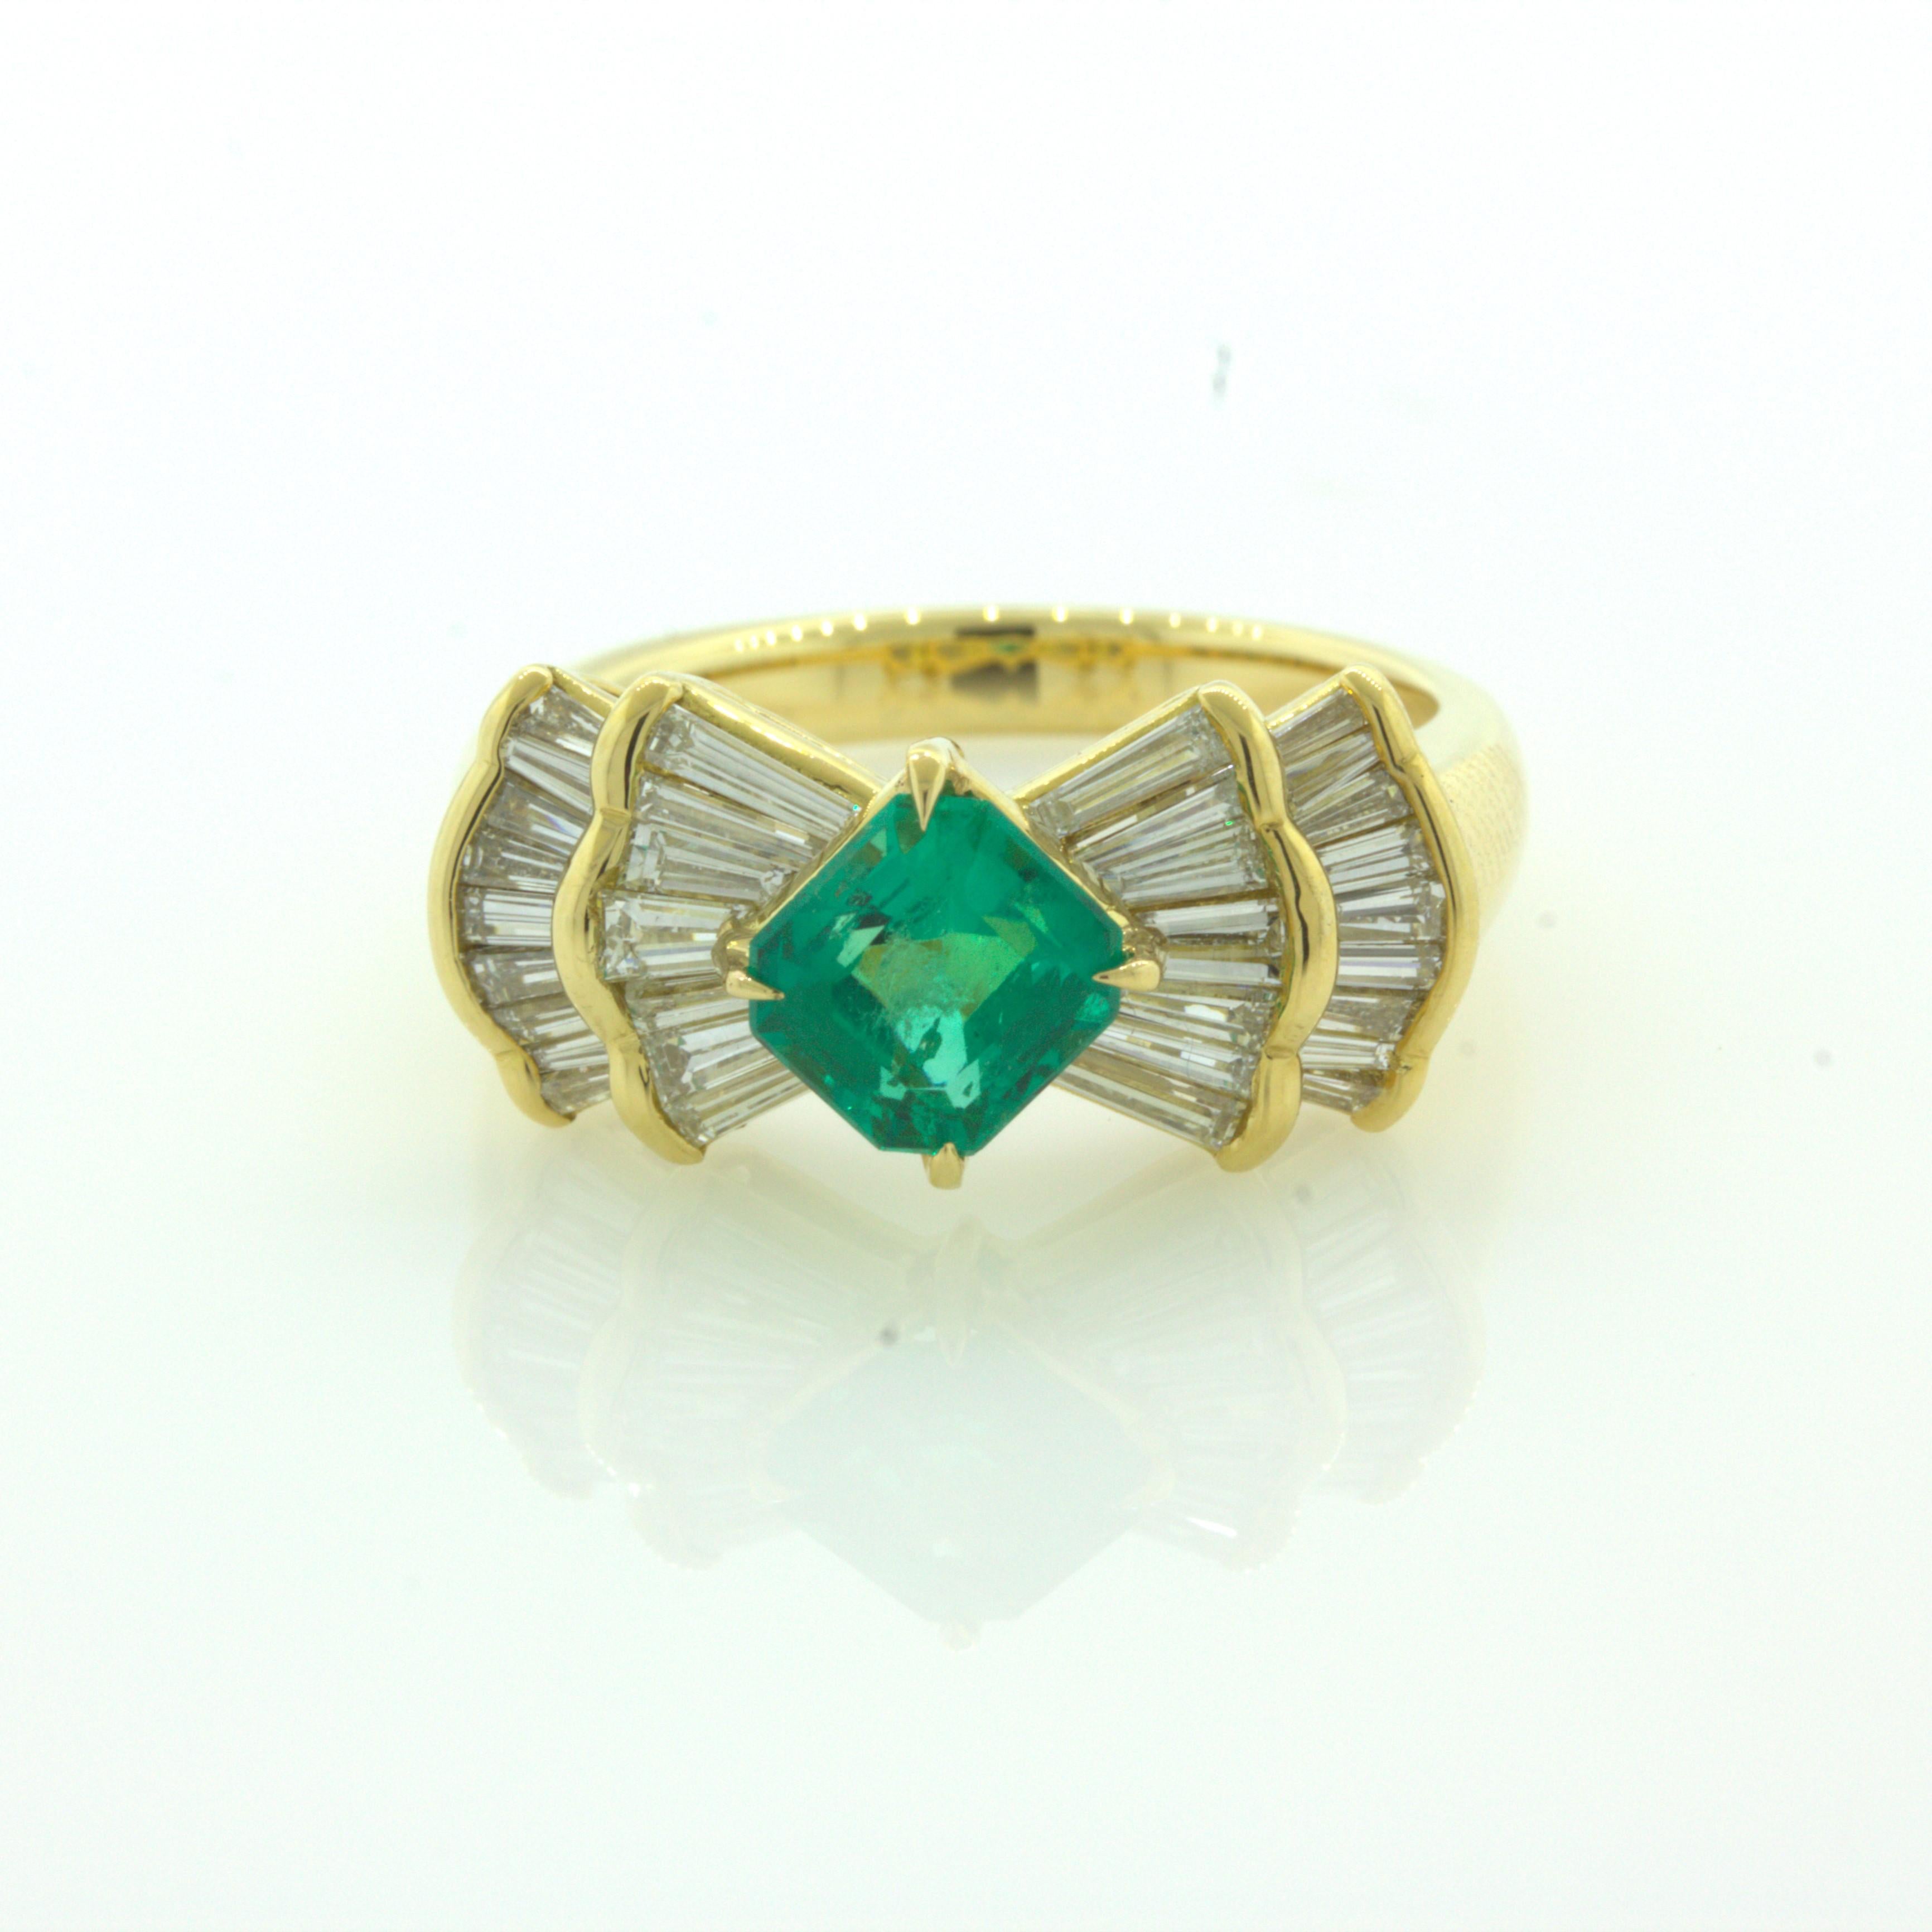 A lovely yellow gold ring featuring a very fine emerald weighing 1.00 carat exactly. What makes this stone very fine is its bright and vivid green color, as if you were looking into a pure green glass. Adding to that, the emerald has a classic